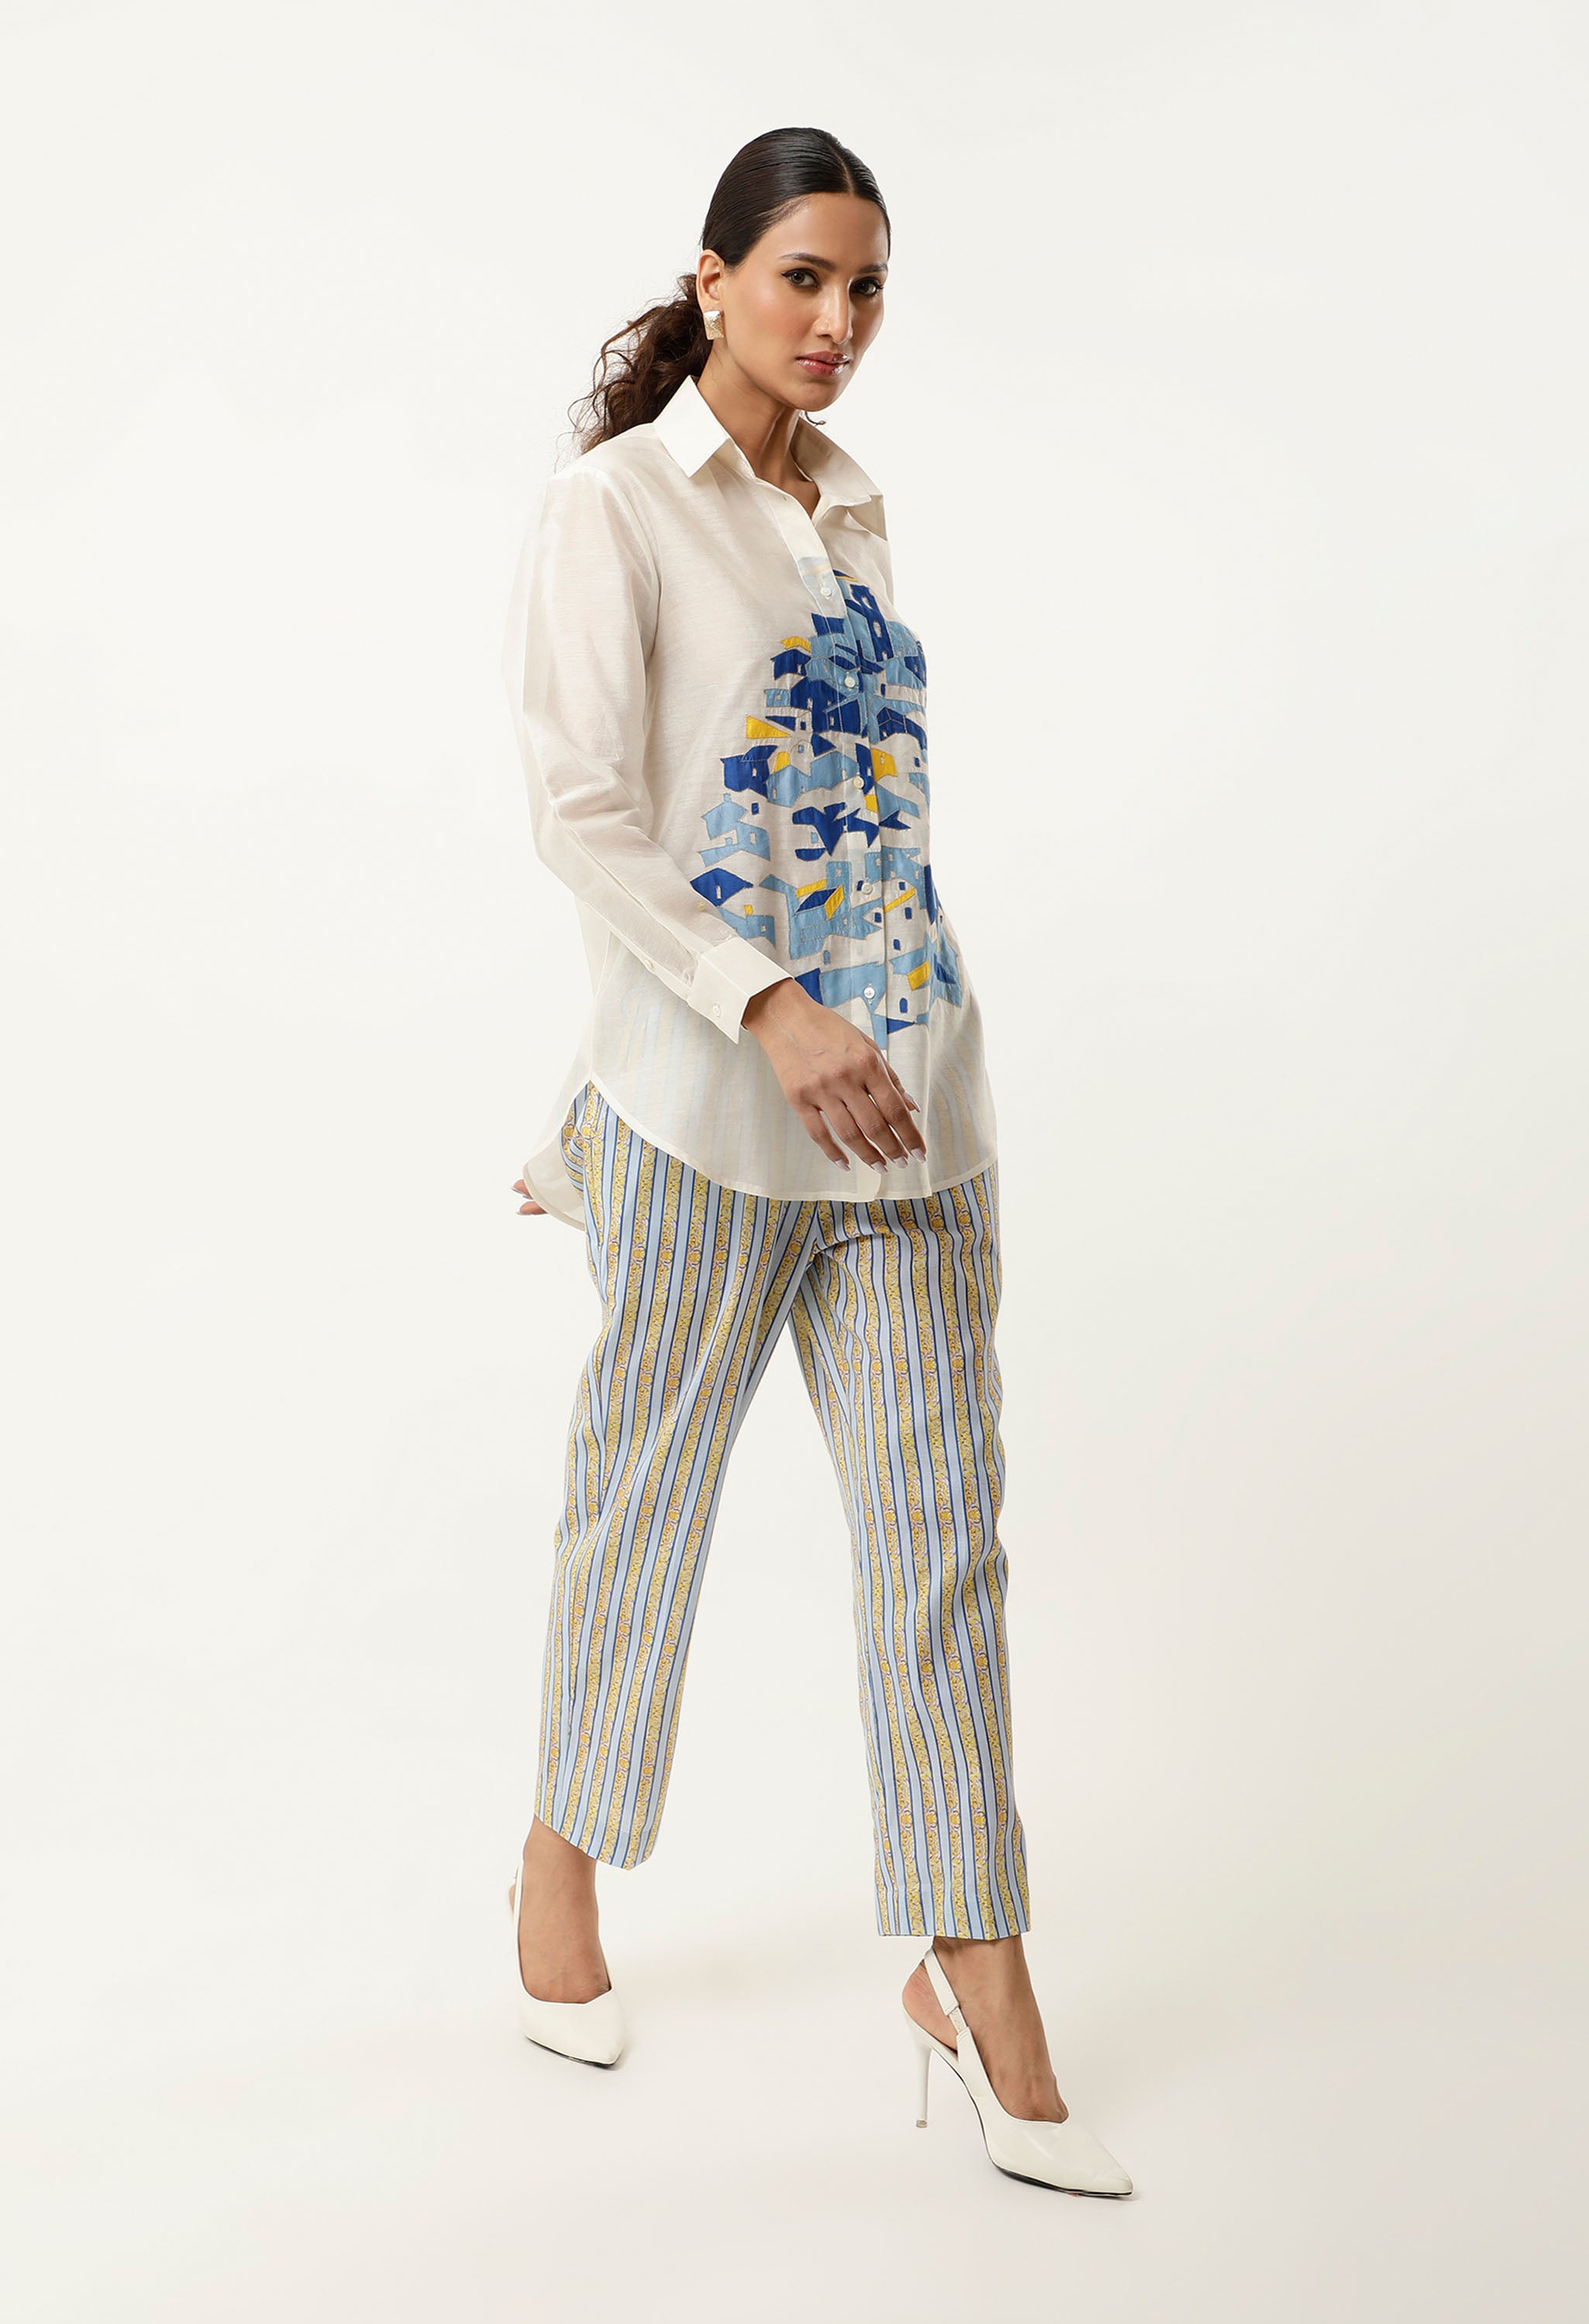 HOUSE EMB SHIRT WITH STRIPED PANTS